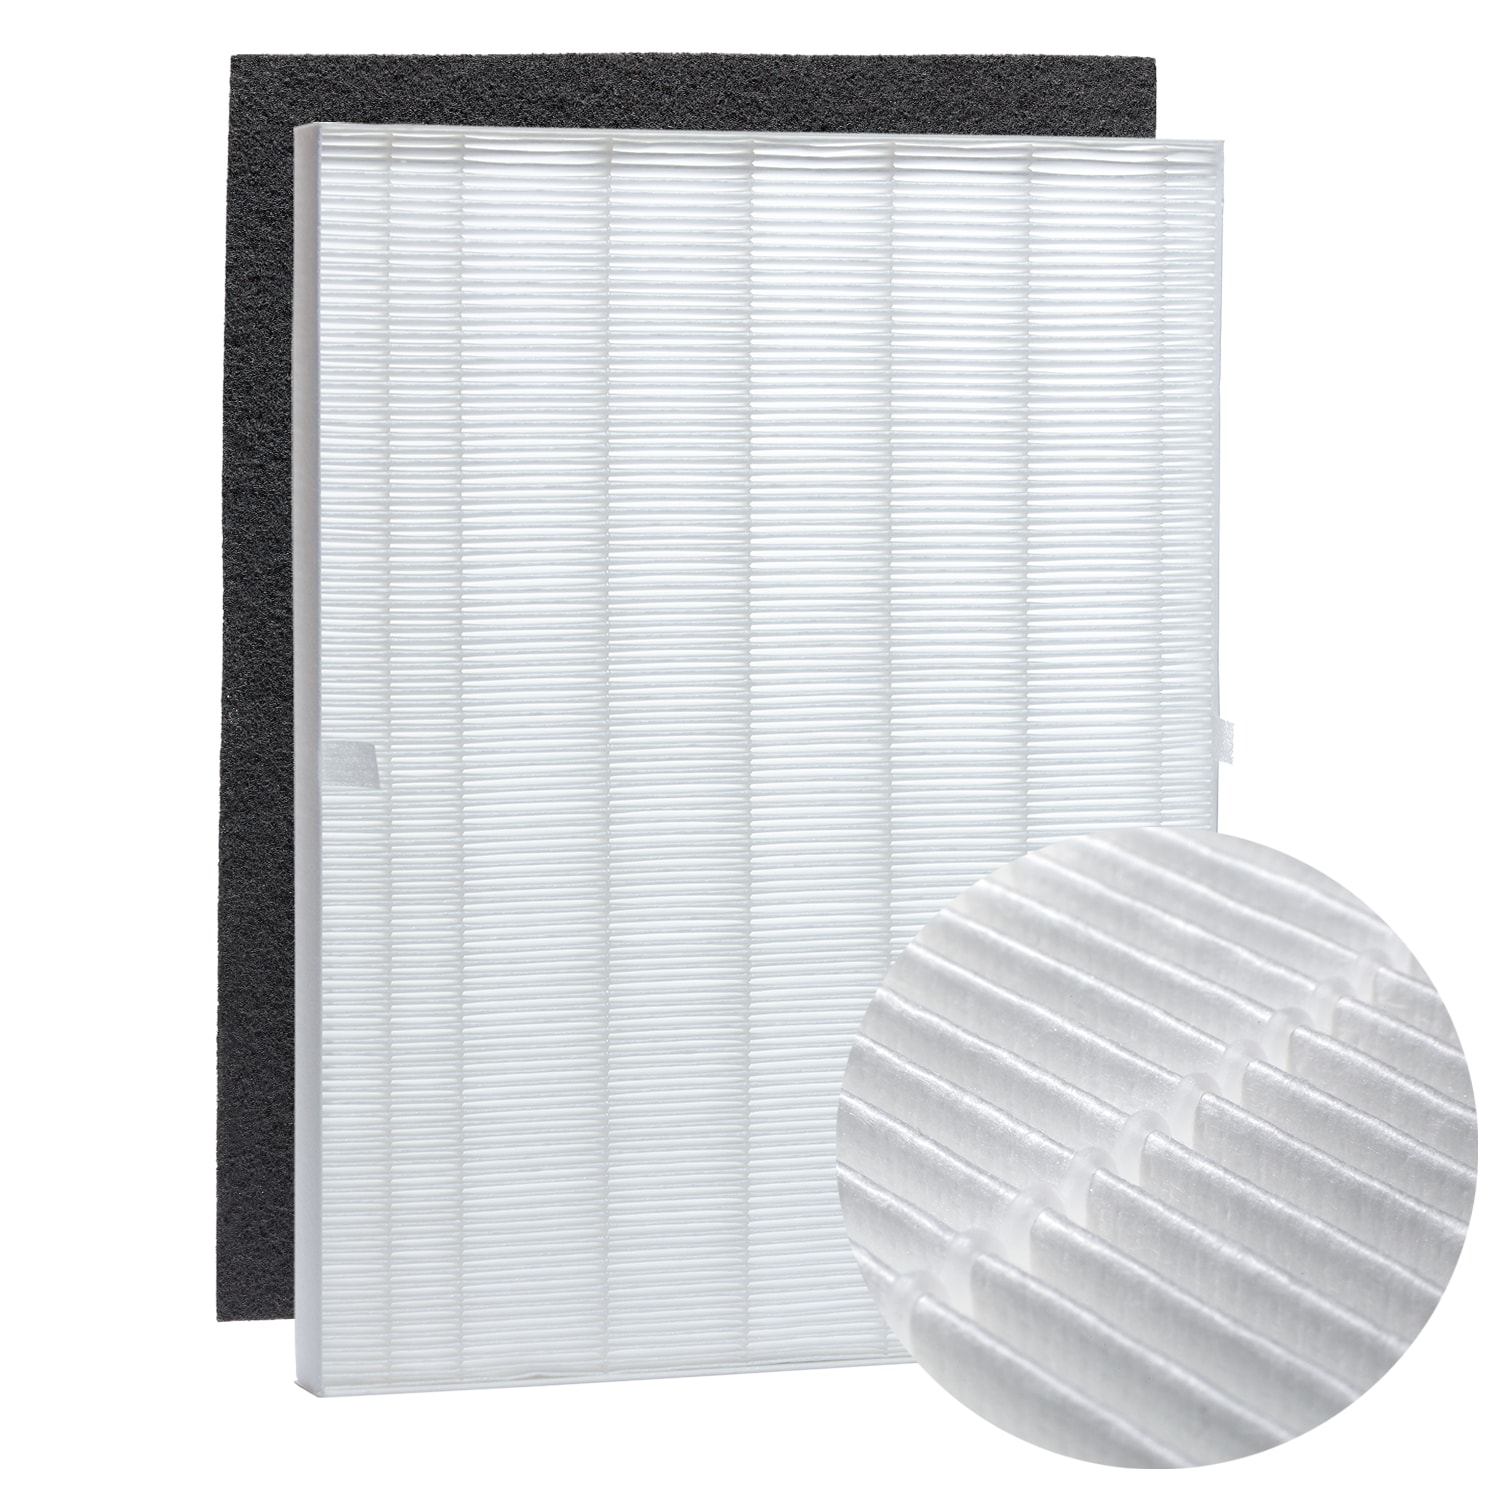 Replacements 1 Winix 115115 Filter 4 Carbon Filters Size 21 Part # WAC5300 